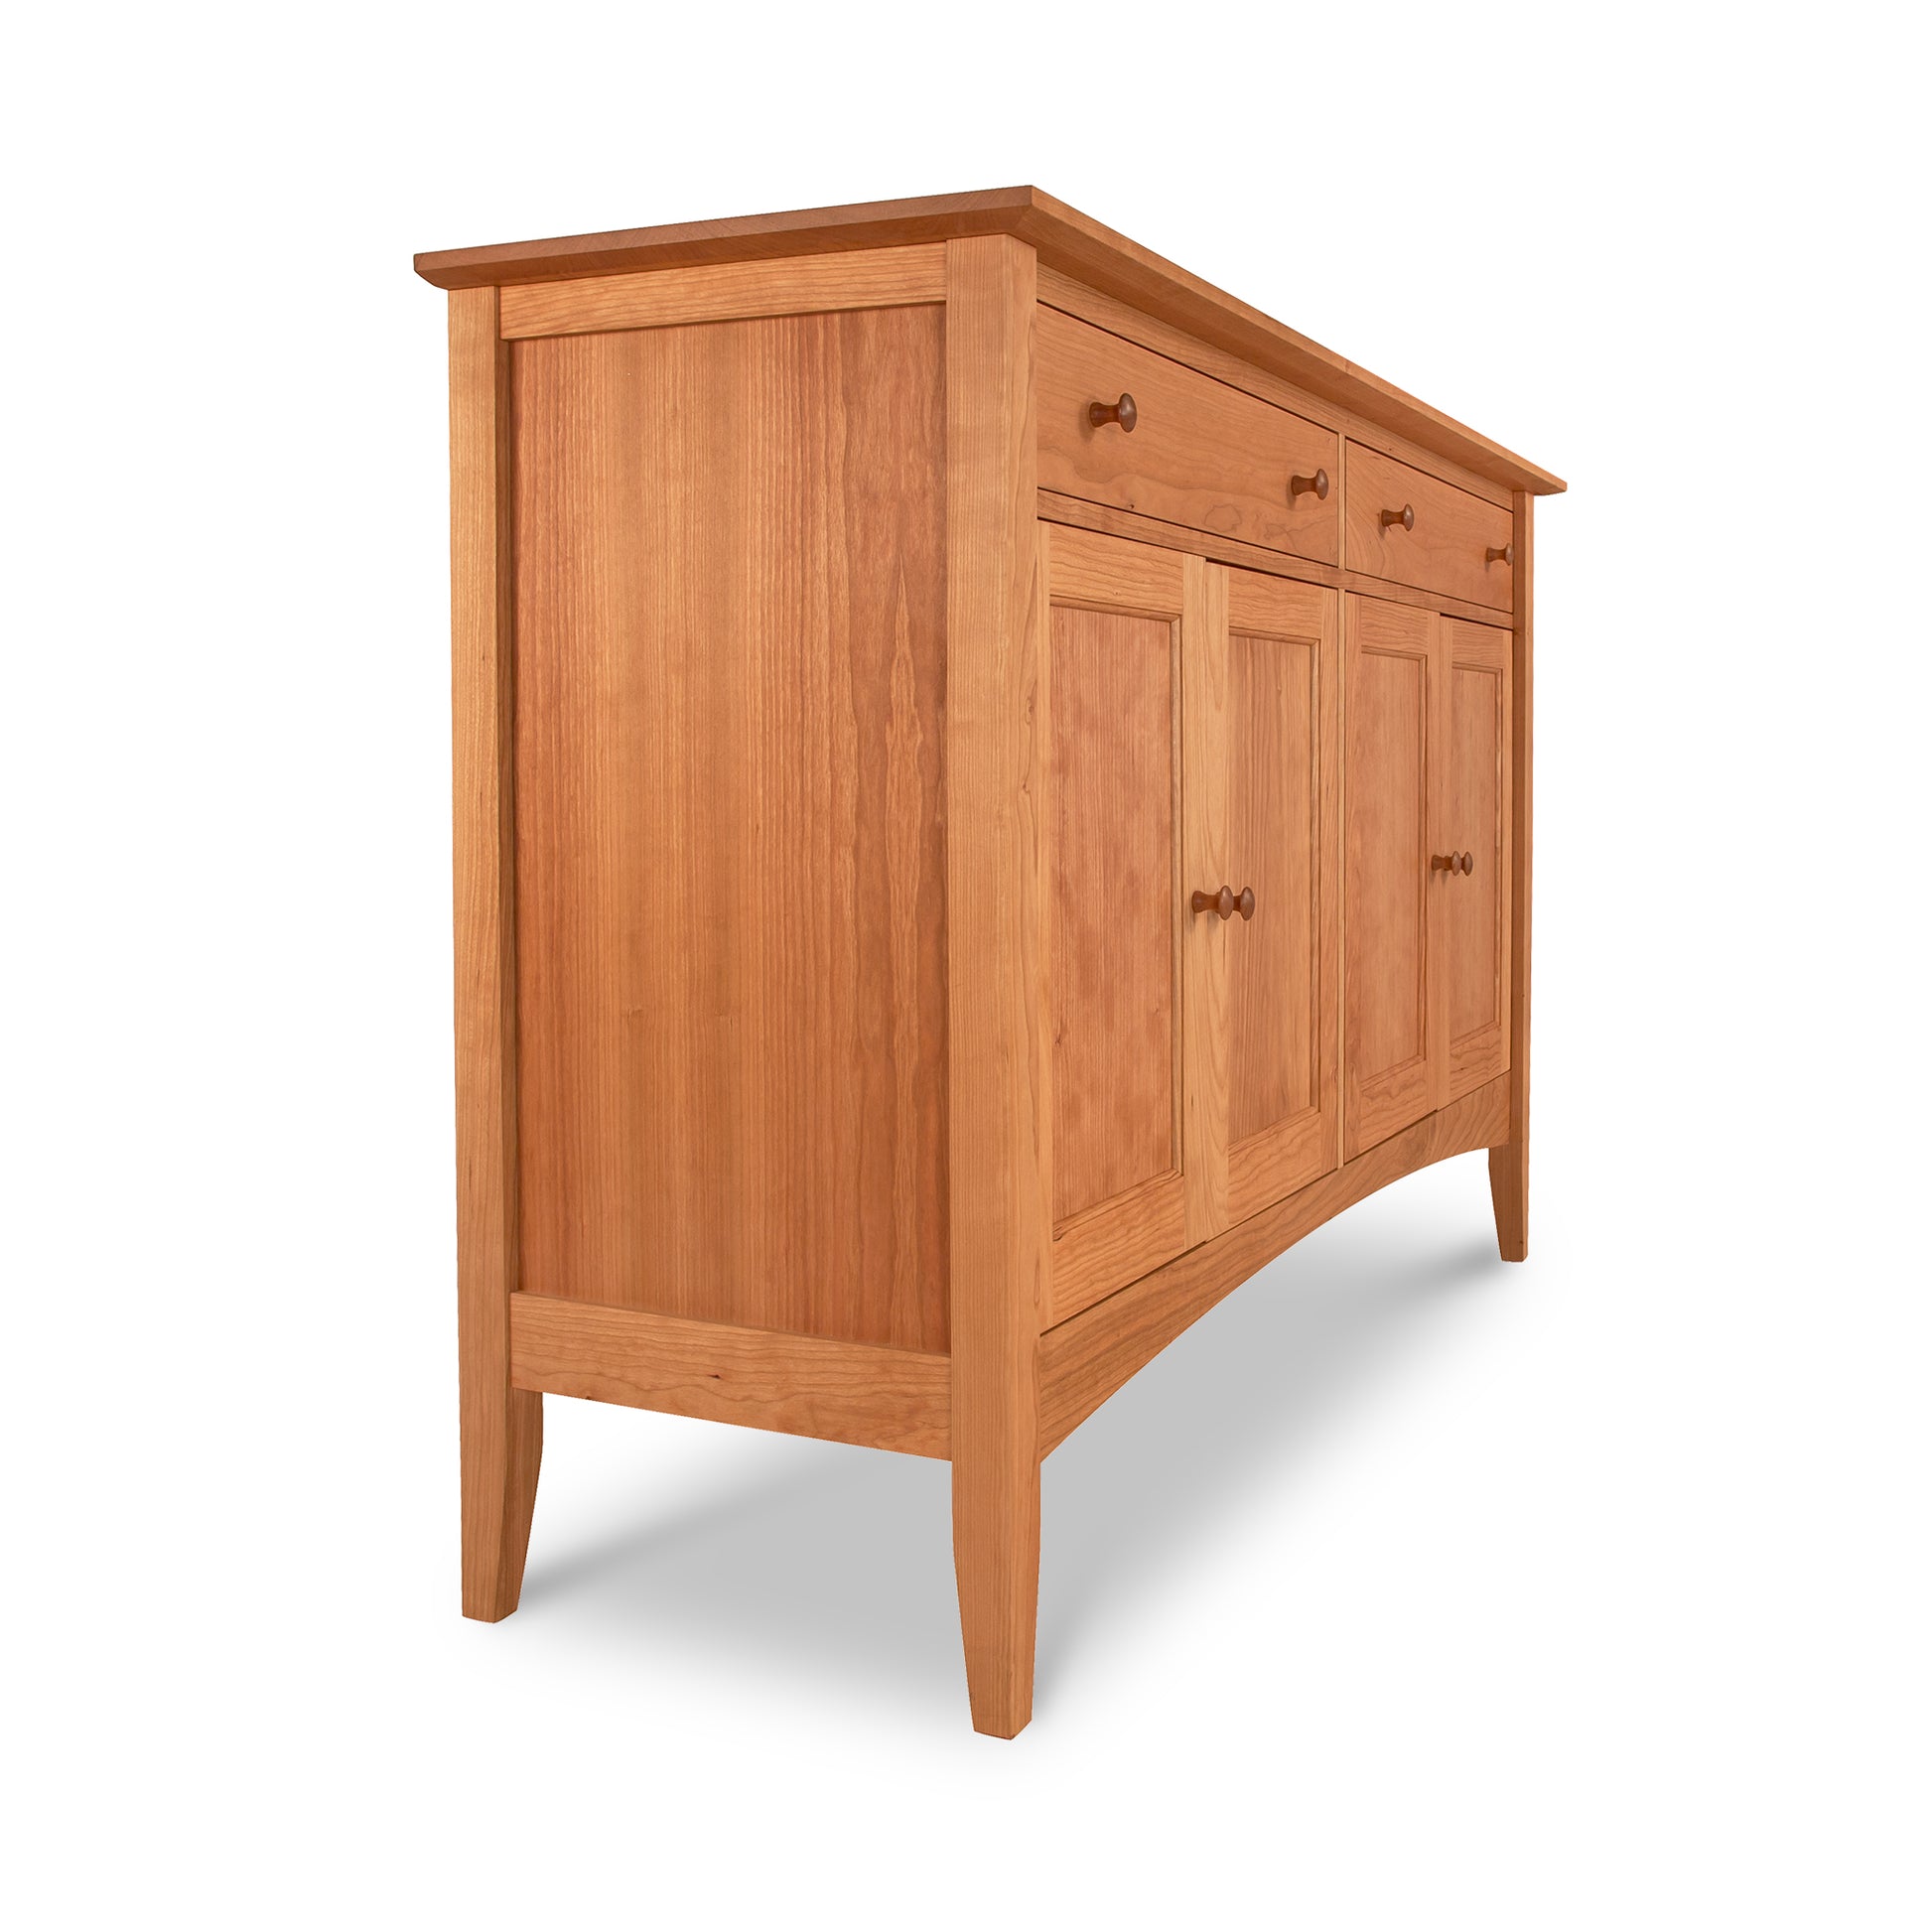 An American Shaker Large Sideboard - Floor Model from Maple Corner Woodworks, with drawers and doors, featuring solid hardwood construction.